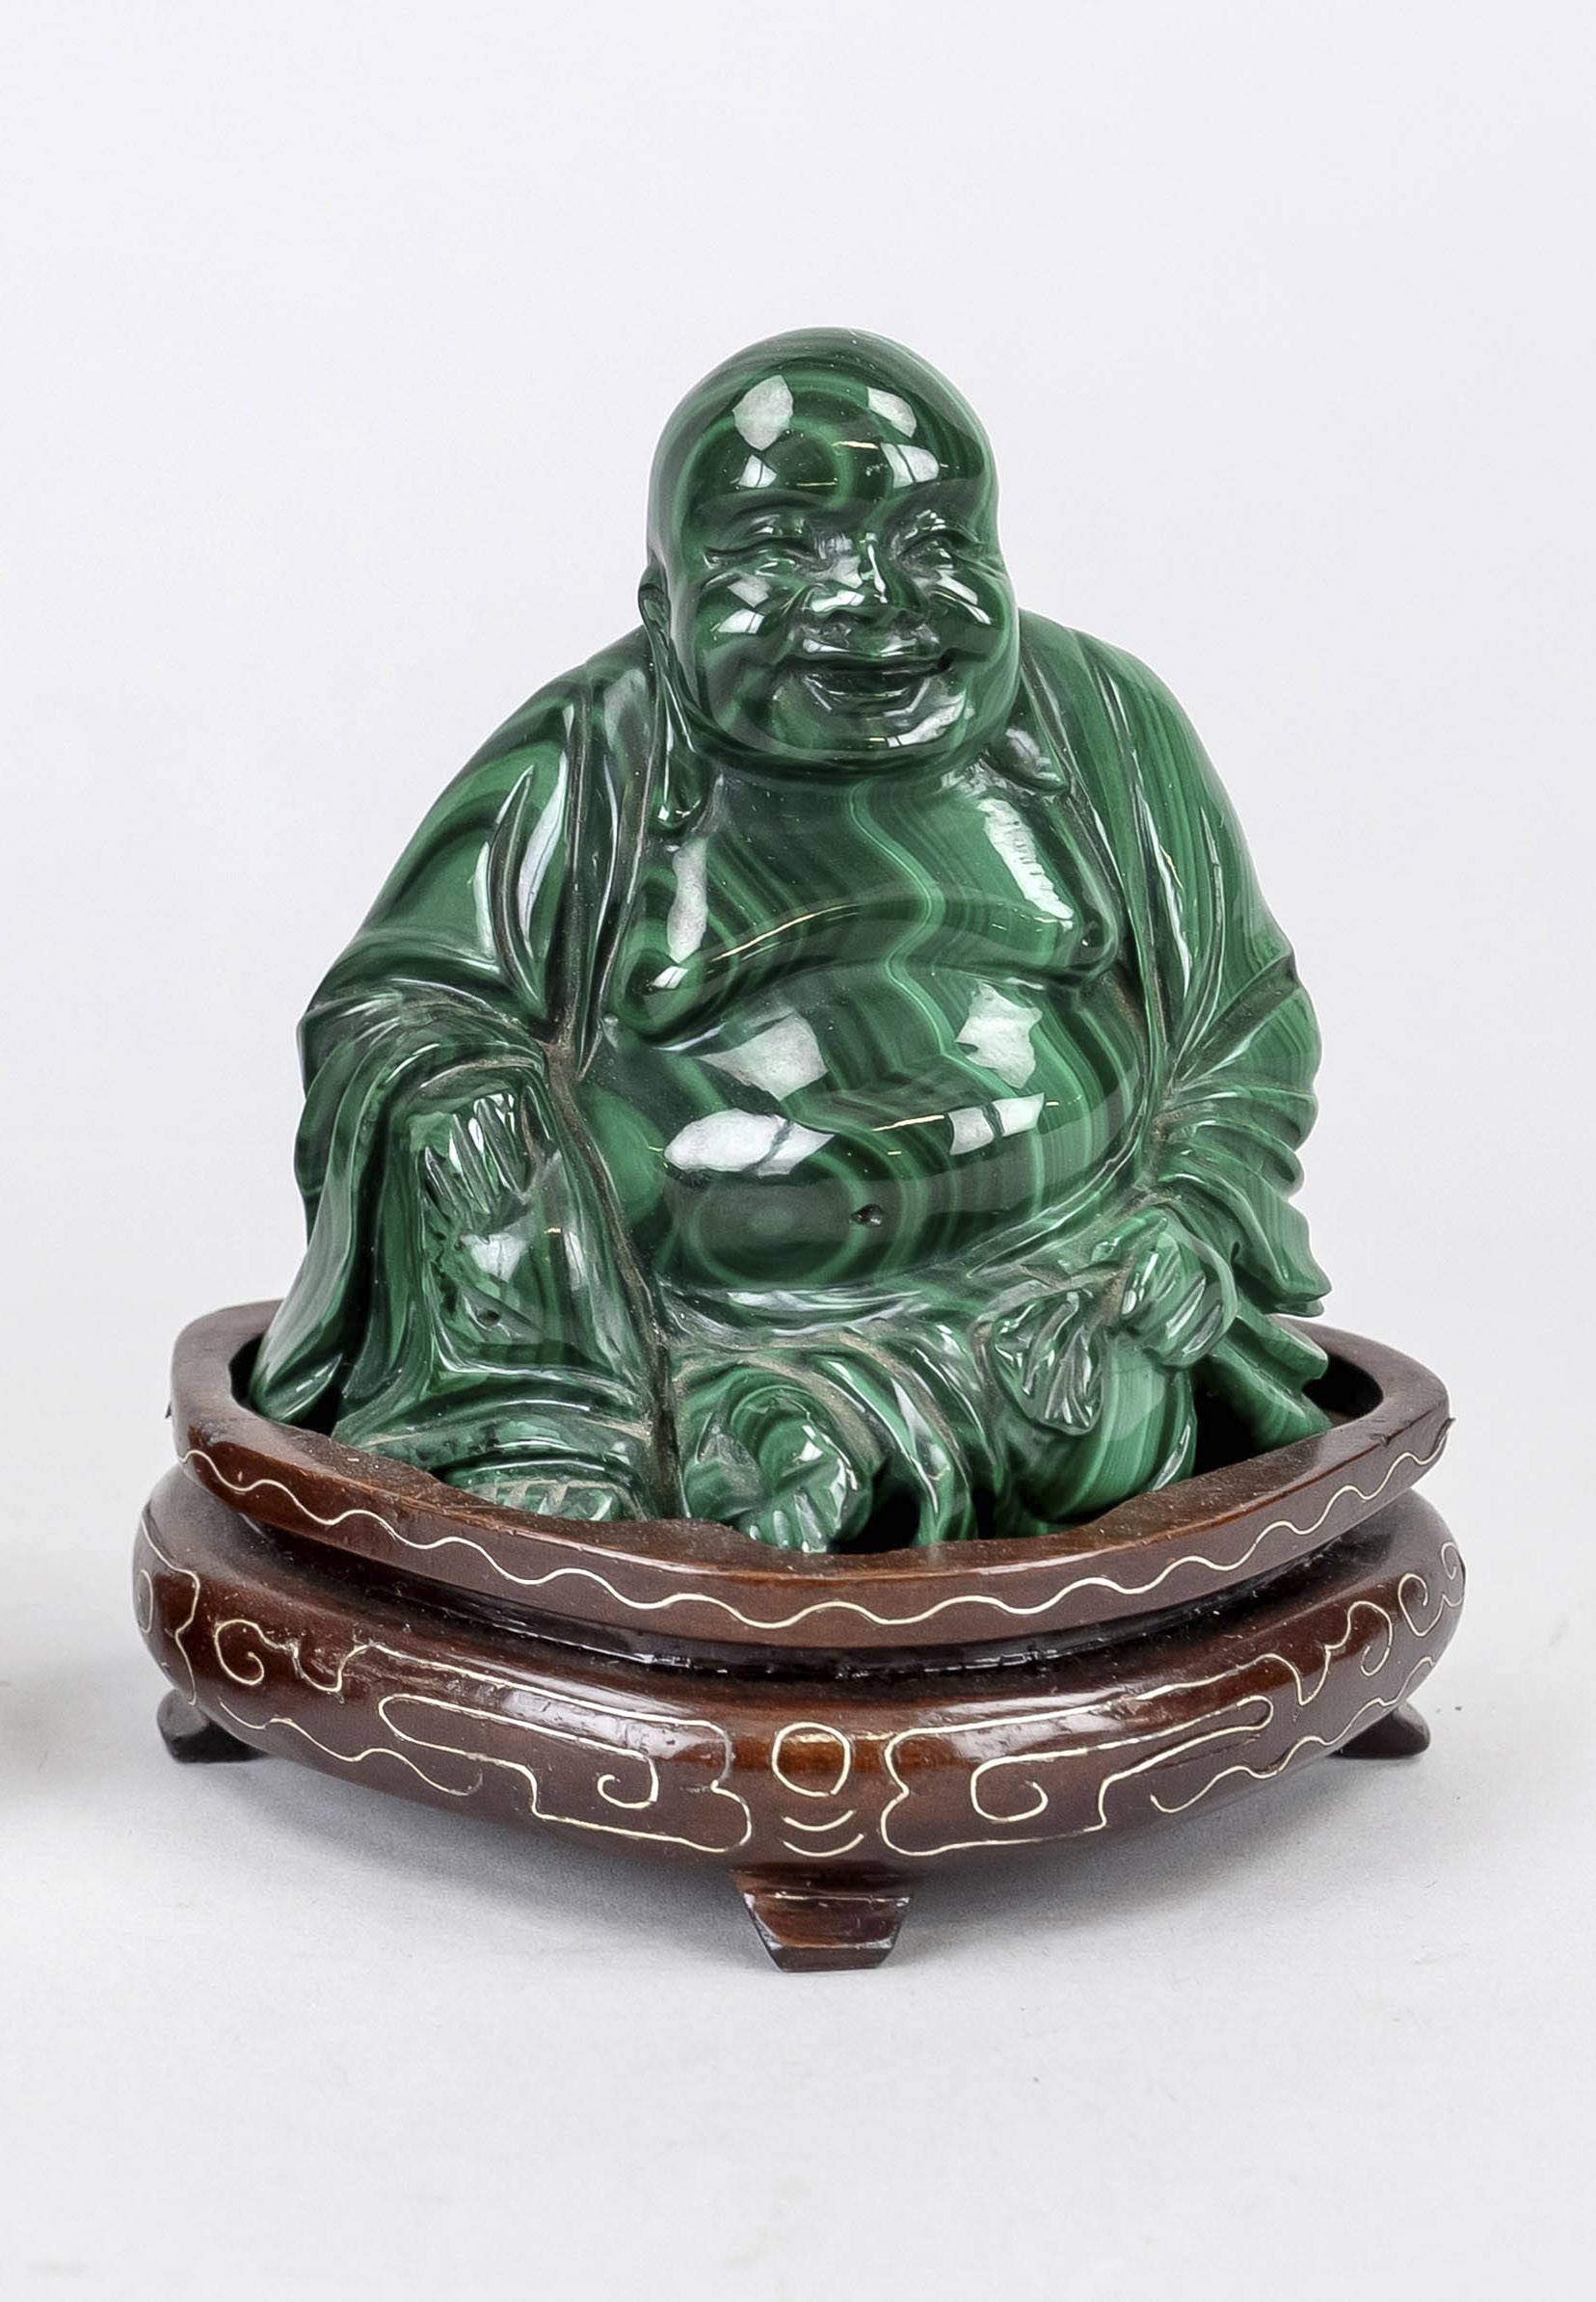 Malachite budai, China, Qing dynasty(1644-1911), 19th/early 20th century, carved moss agate with